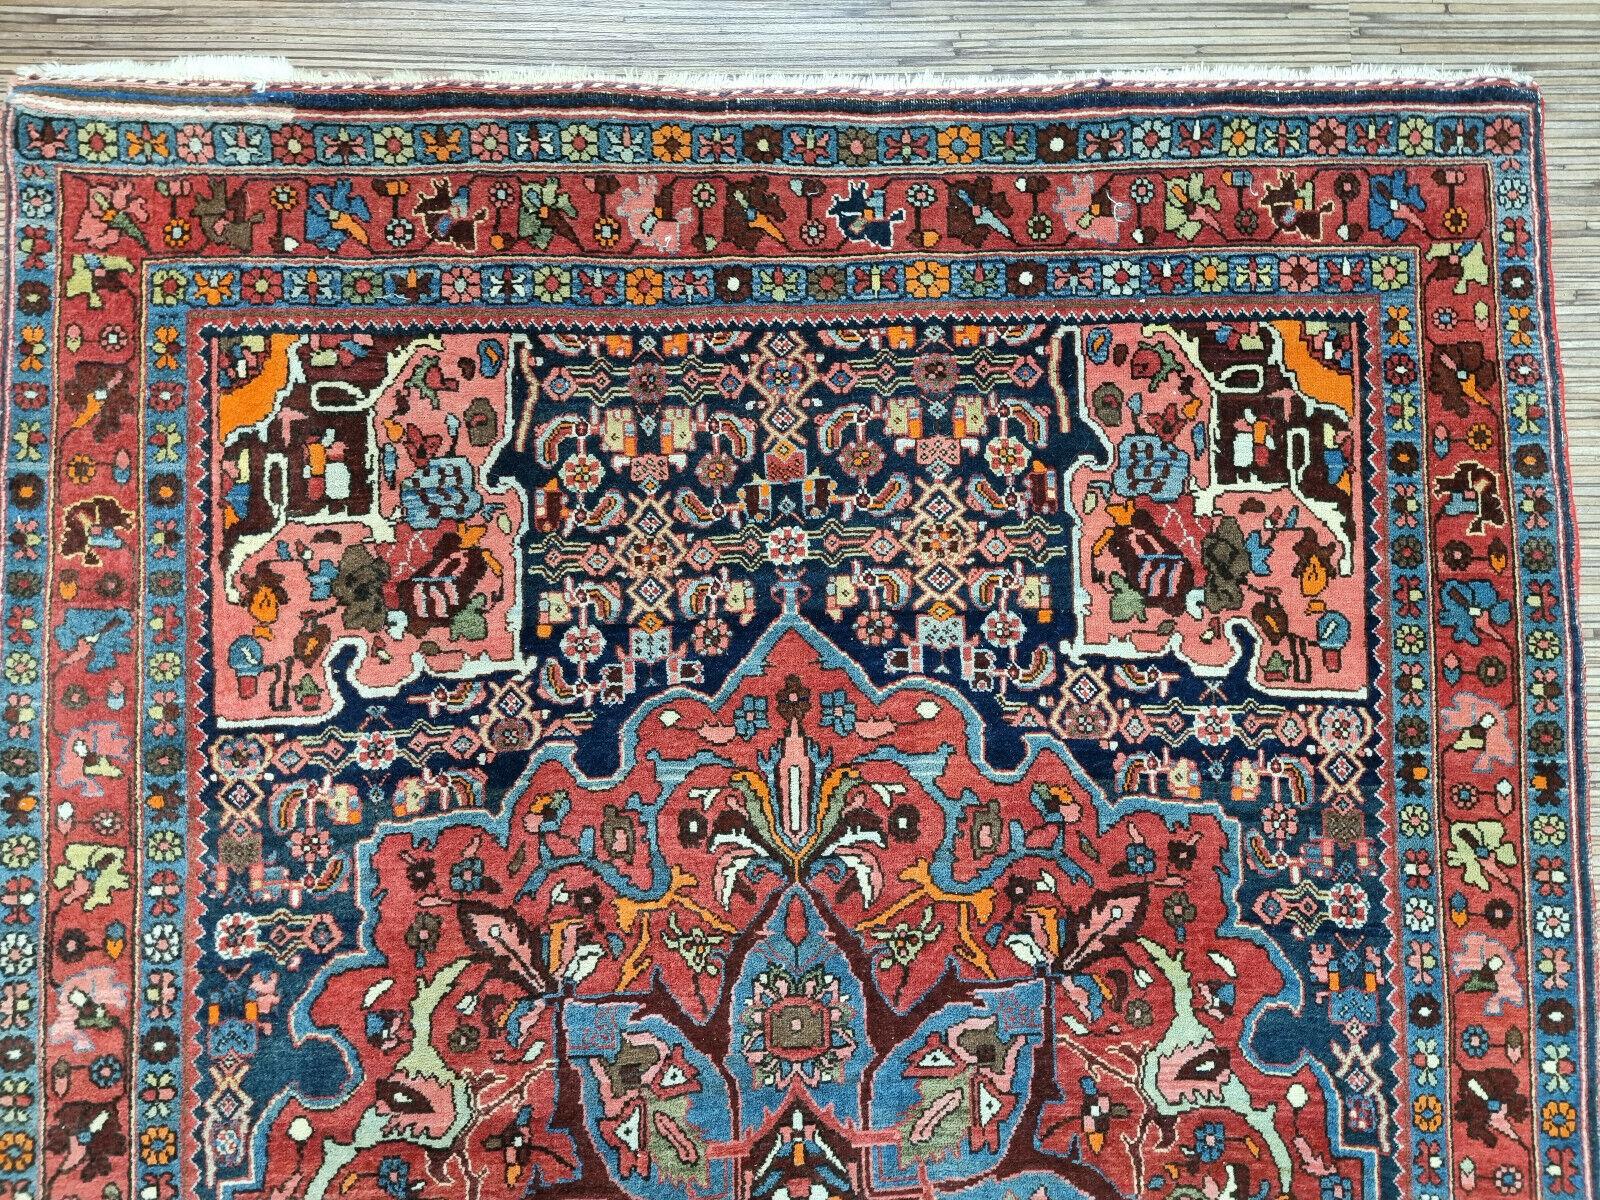 Early 20th Century Handmade Antique Persian Style Bidjar Rug 3.8' x 5.3', 1910s - 1D100 For Sale